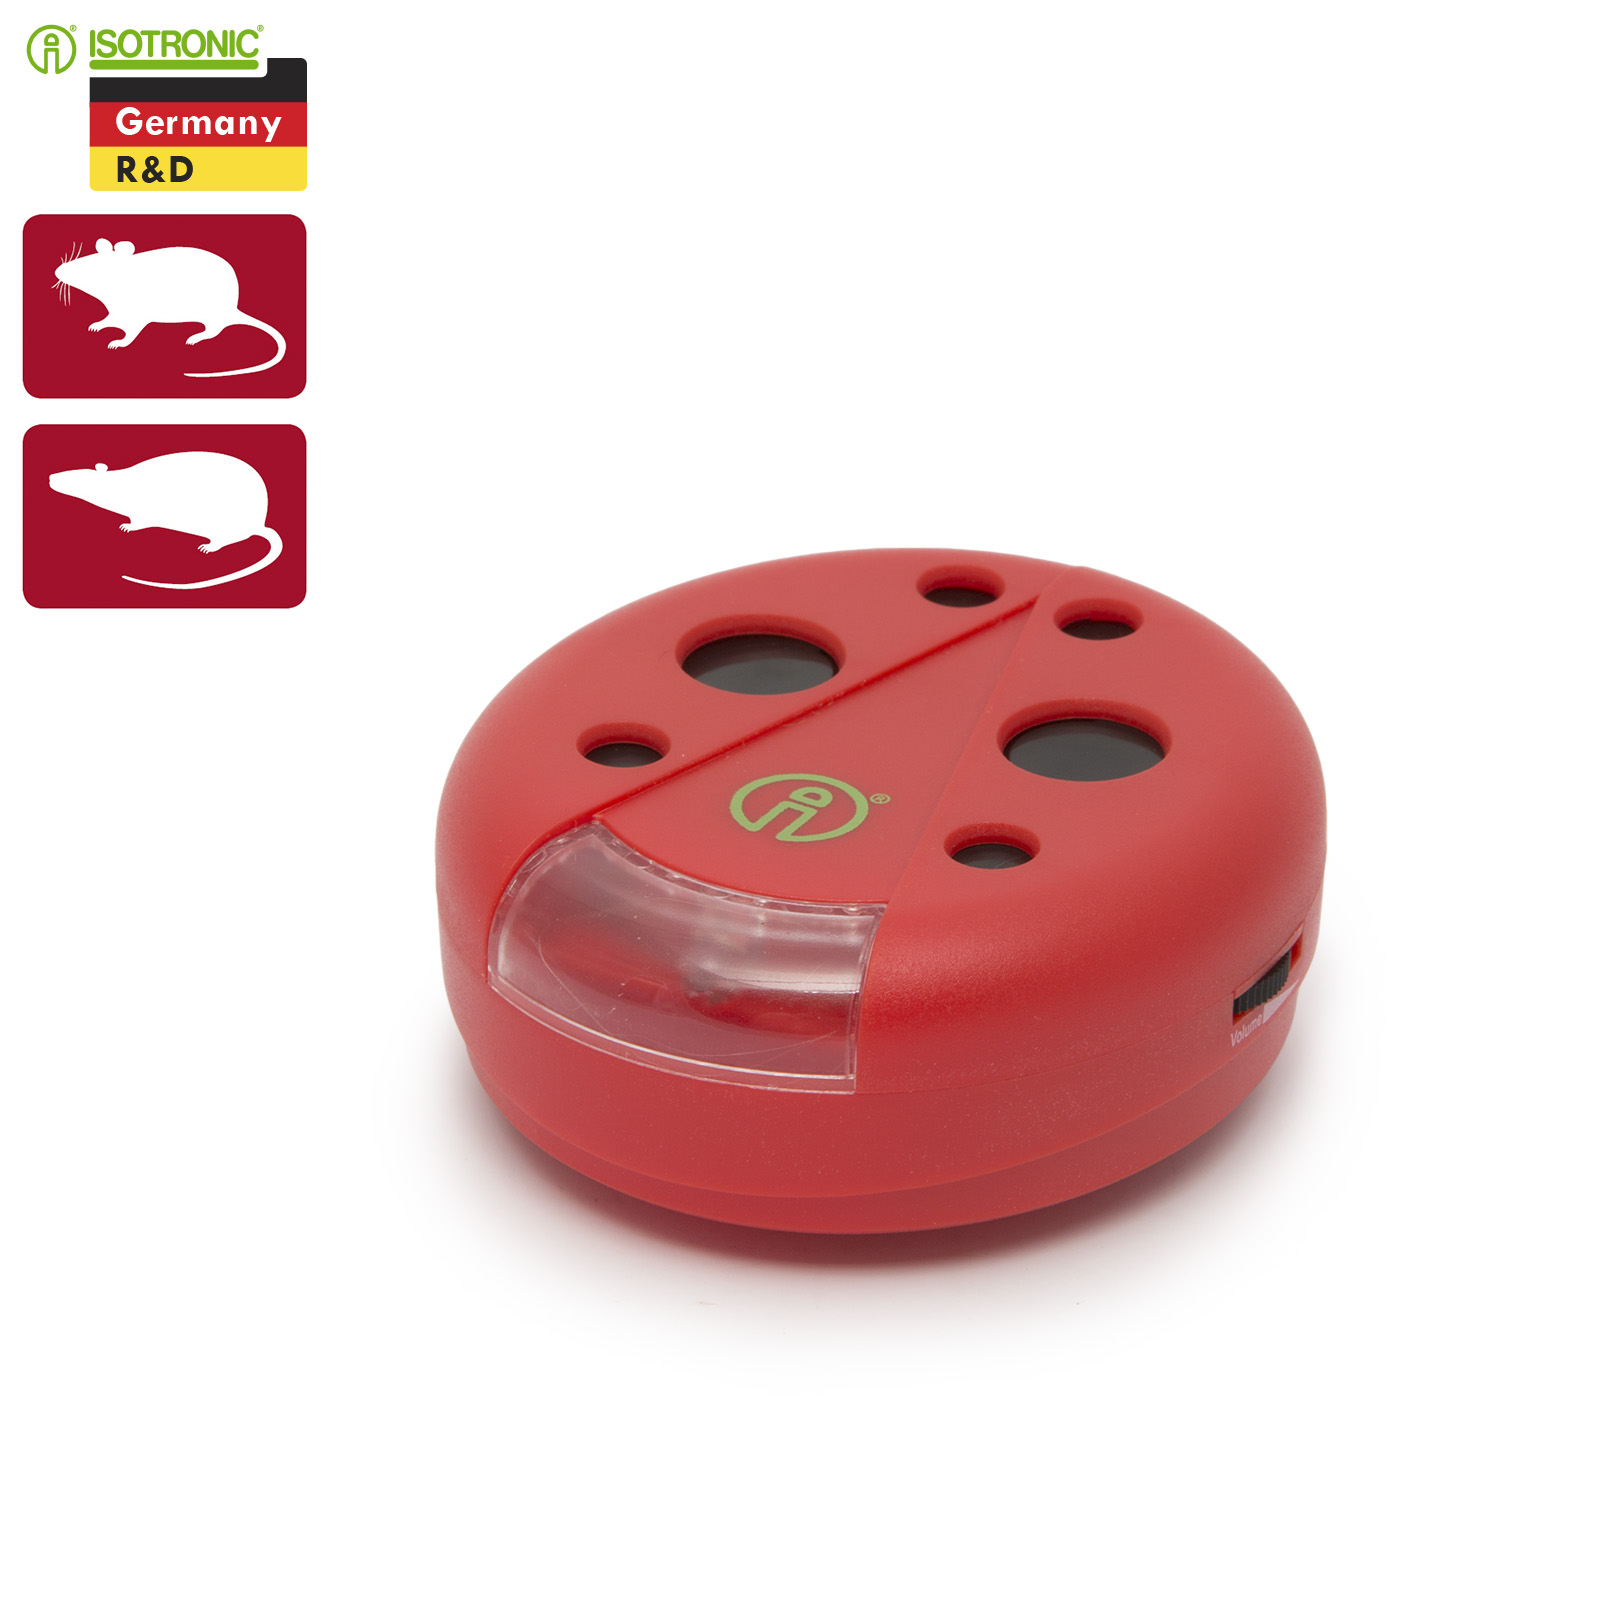 Rodent repellent with LED lamp on batteries